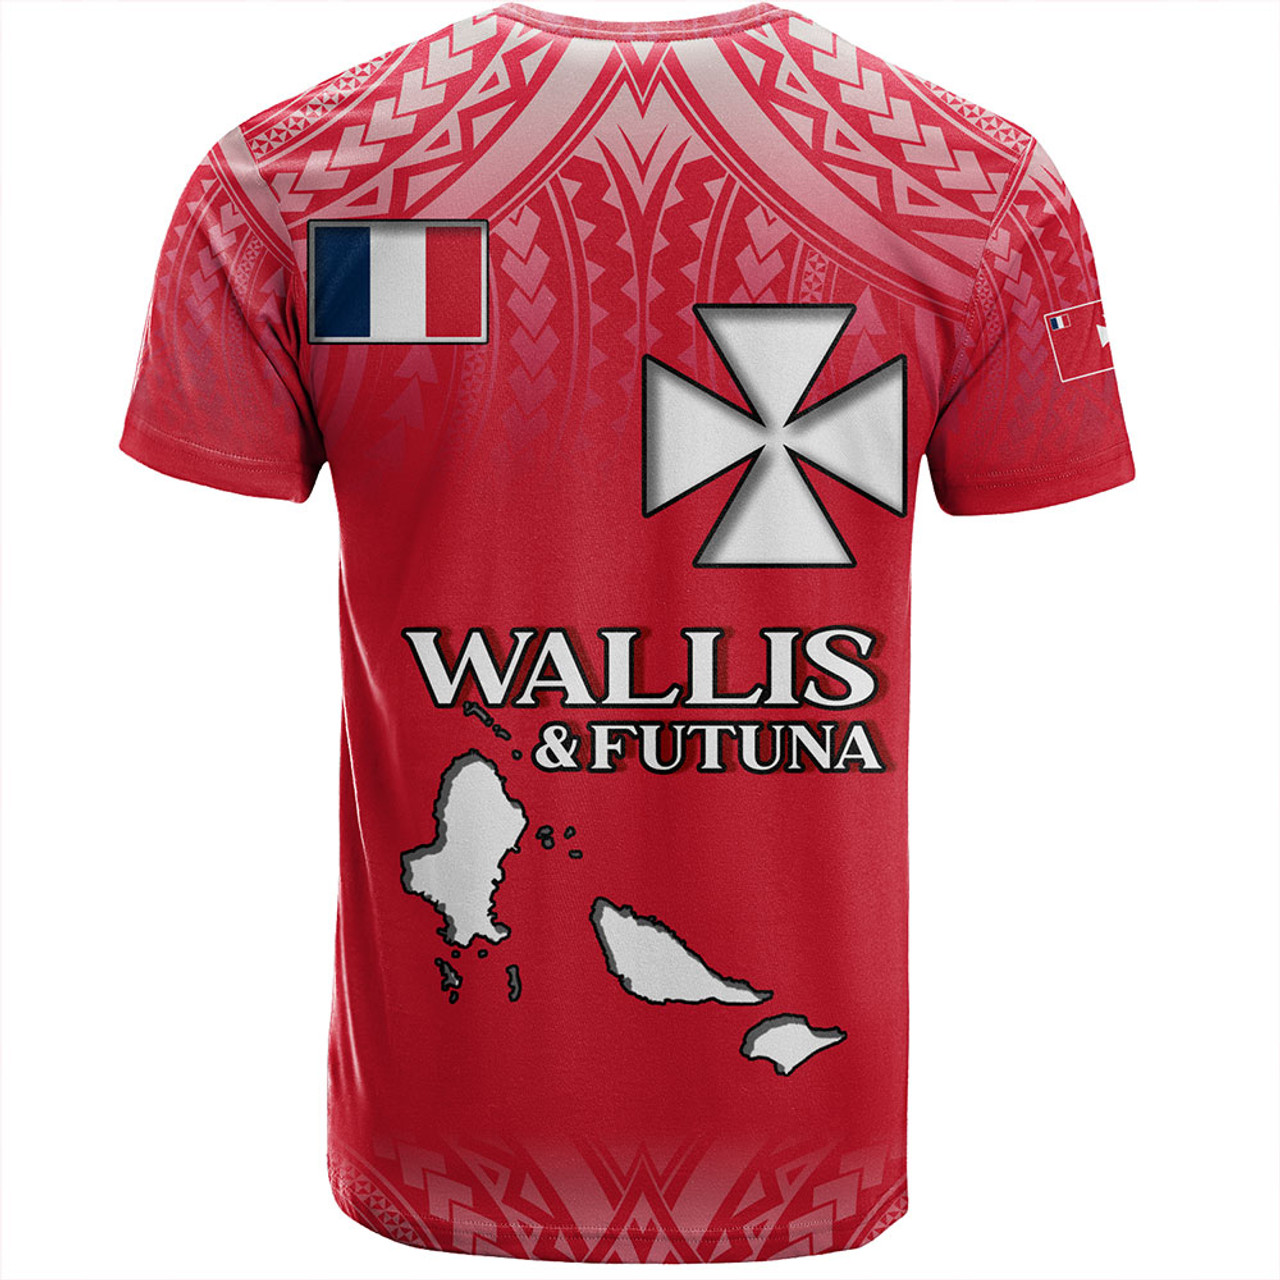 Wallis And Futuna T-Shirt Flag Color With Traditional Patterns